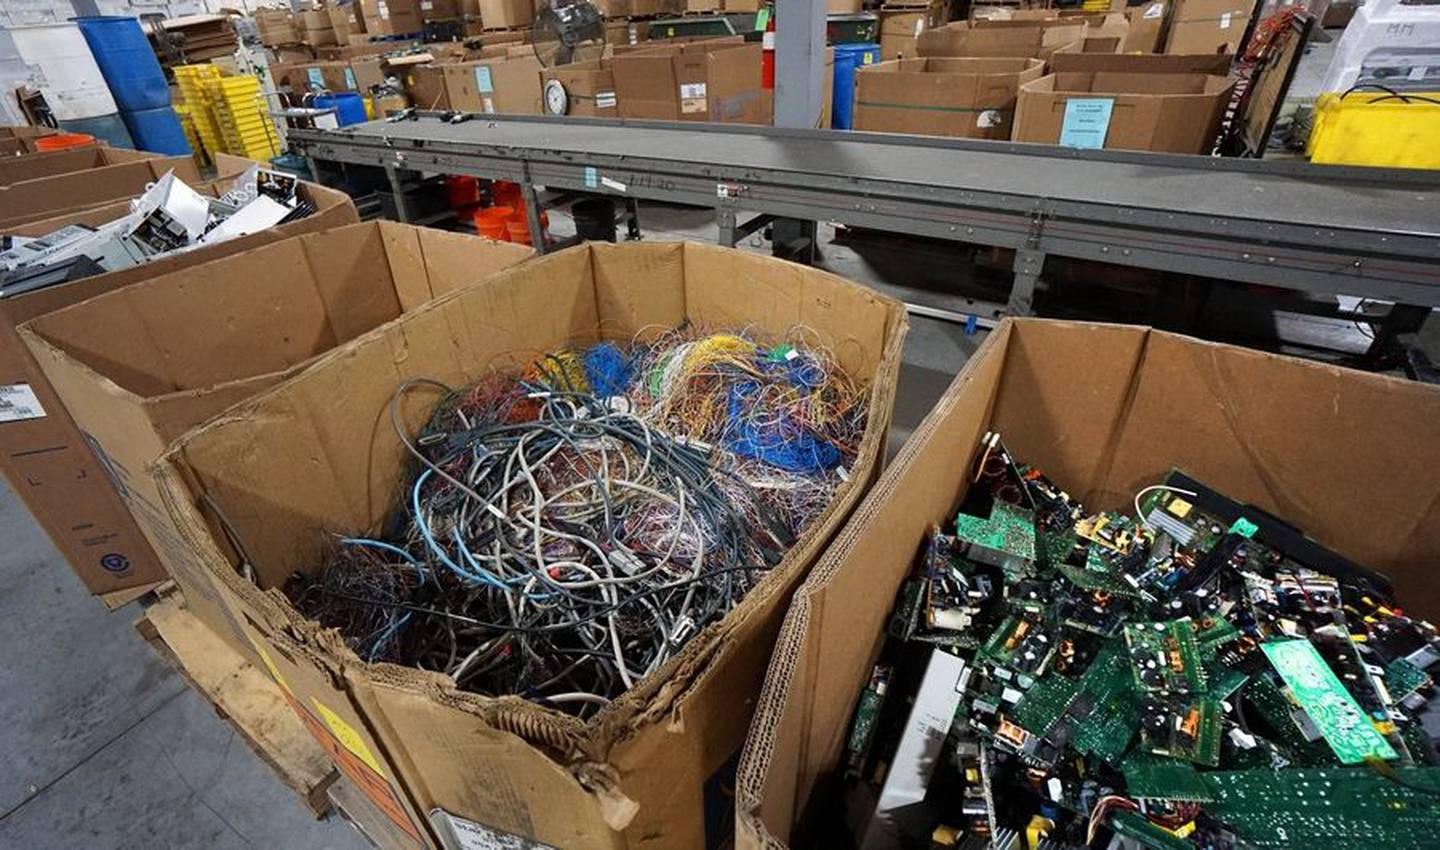 Items wait to be processed at Elgin Recycling's 65,000-square-foot electronics recycling warehouse in West Dundee.